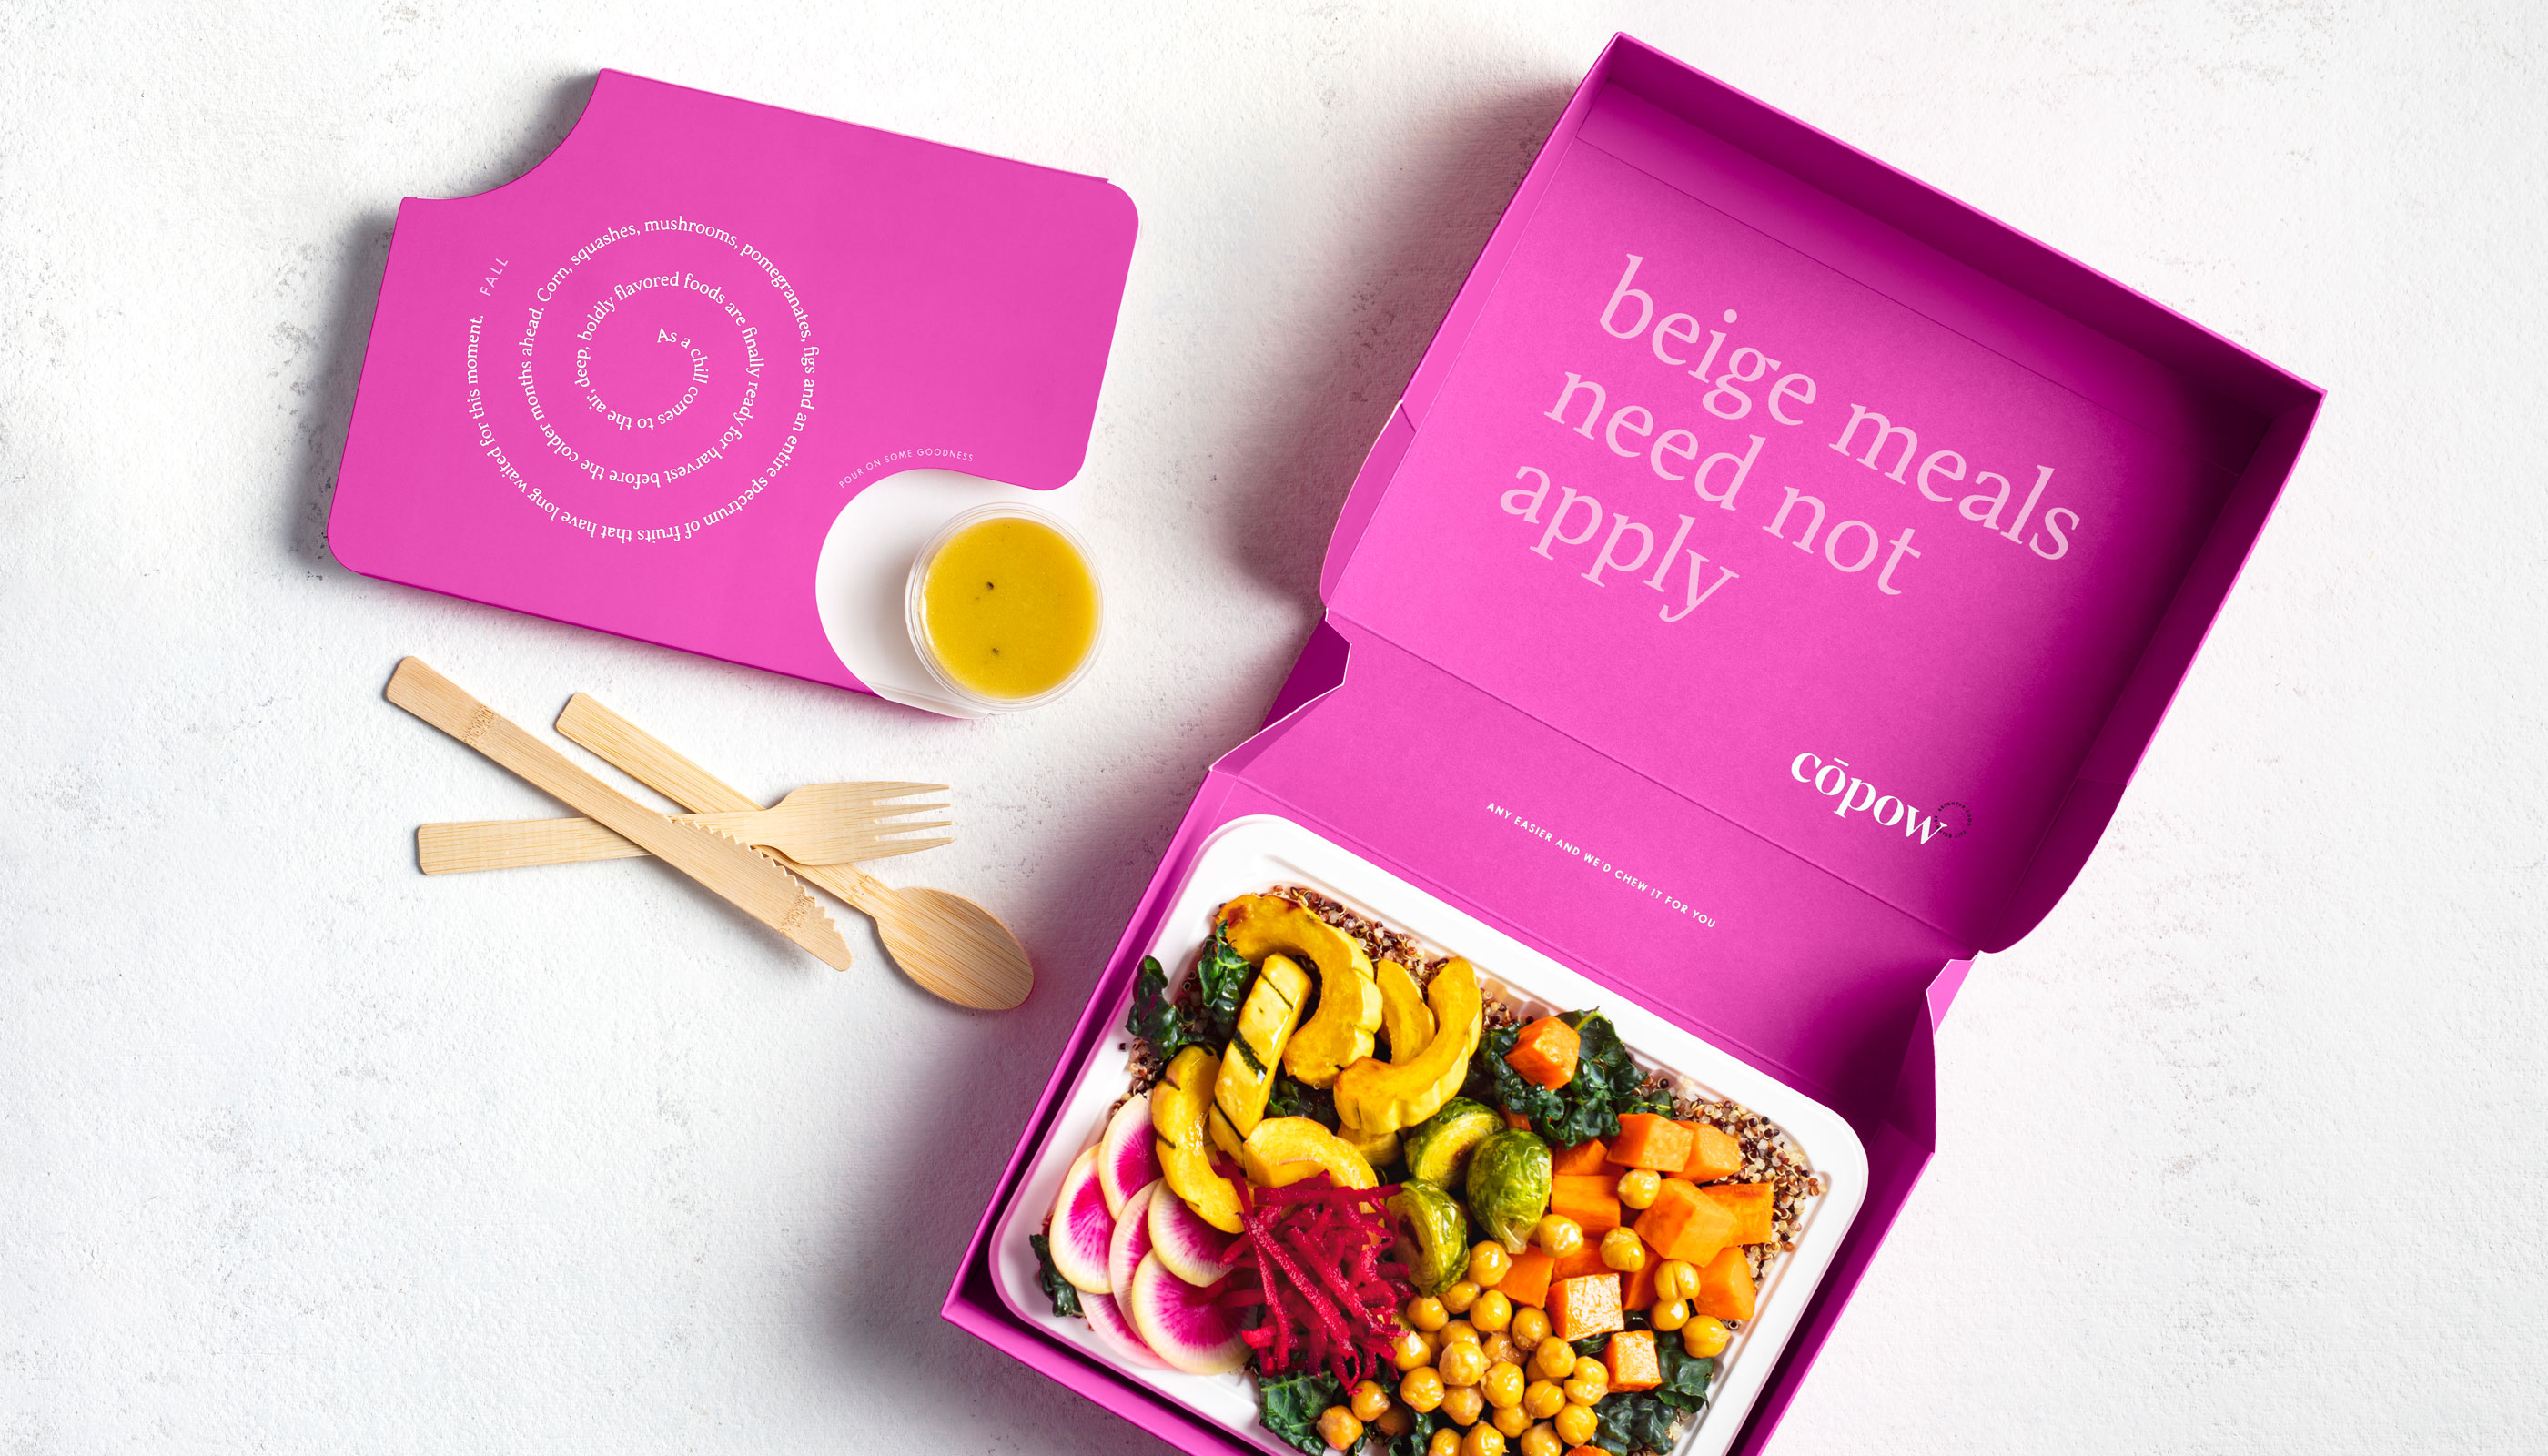 Branding And Packaging Design: Copow Meal Delivery